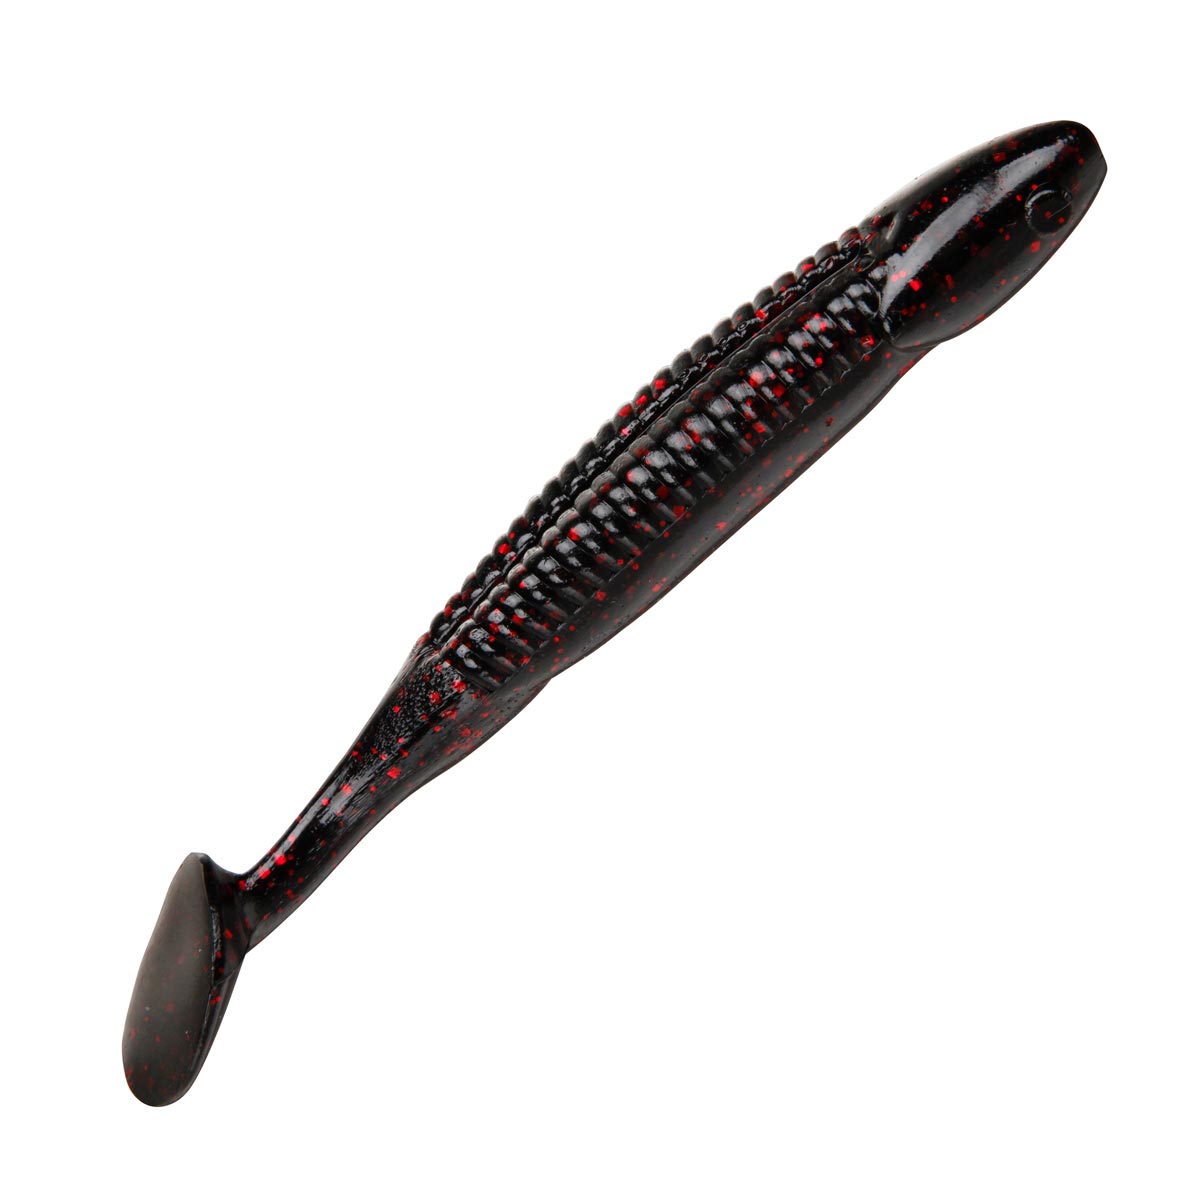 Charlie's Worms Zipper Dipper Neon black red flake